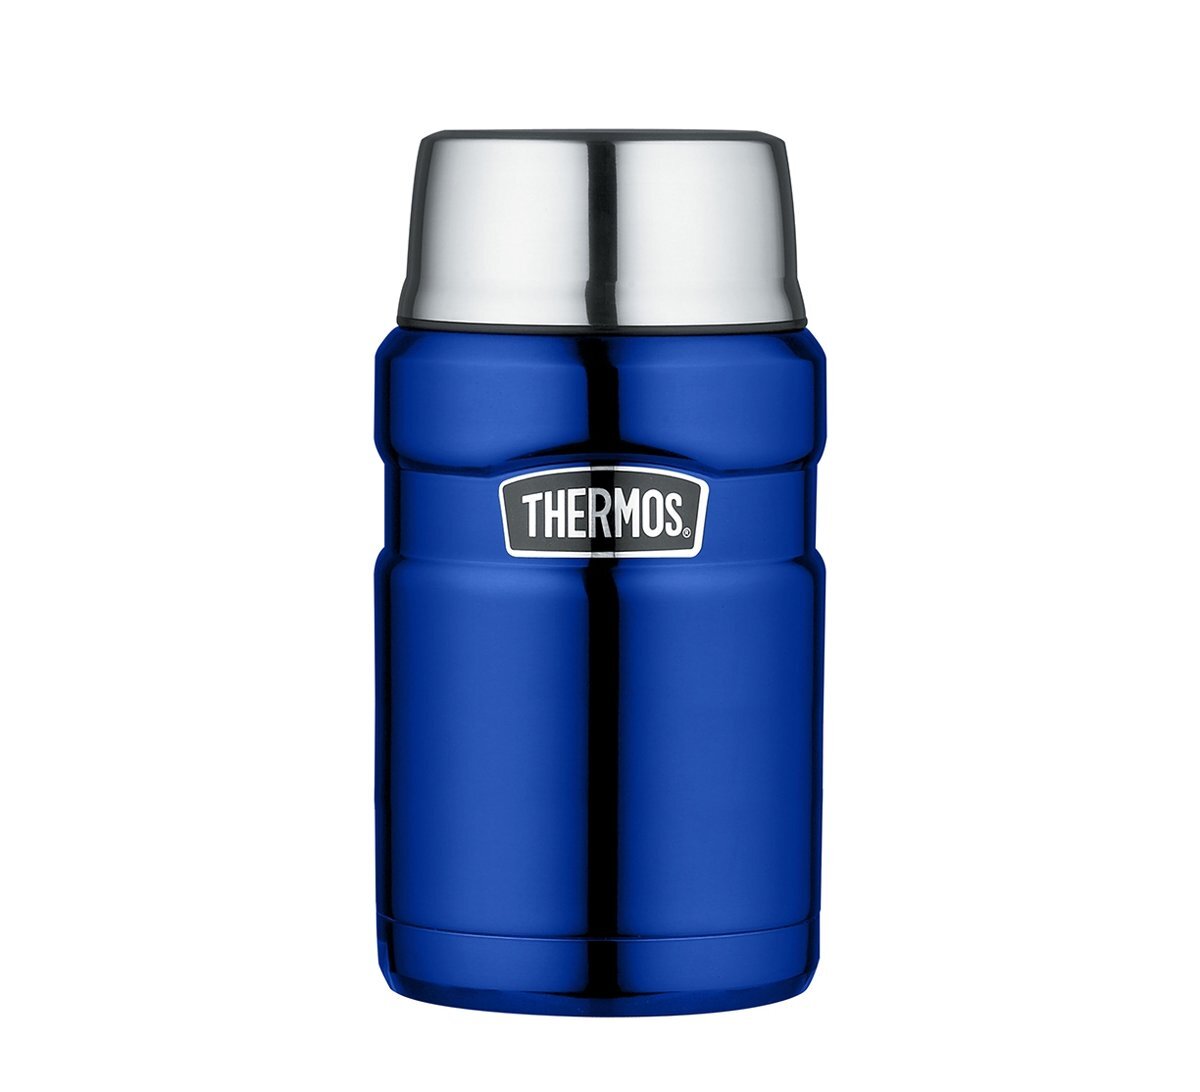 Thermos King voedselcontainer - 710 ml - metallic blauw